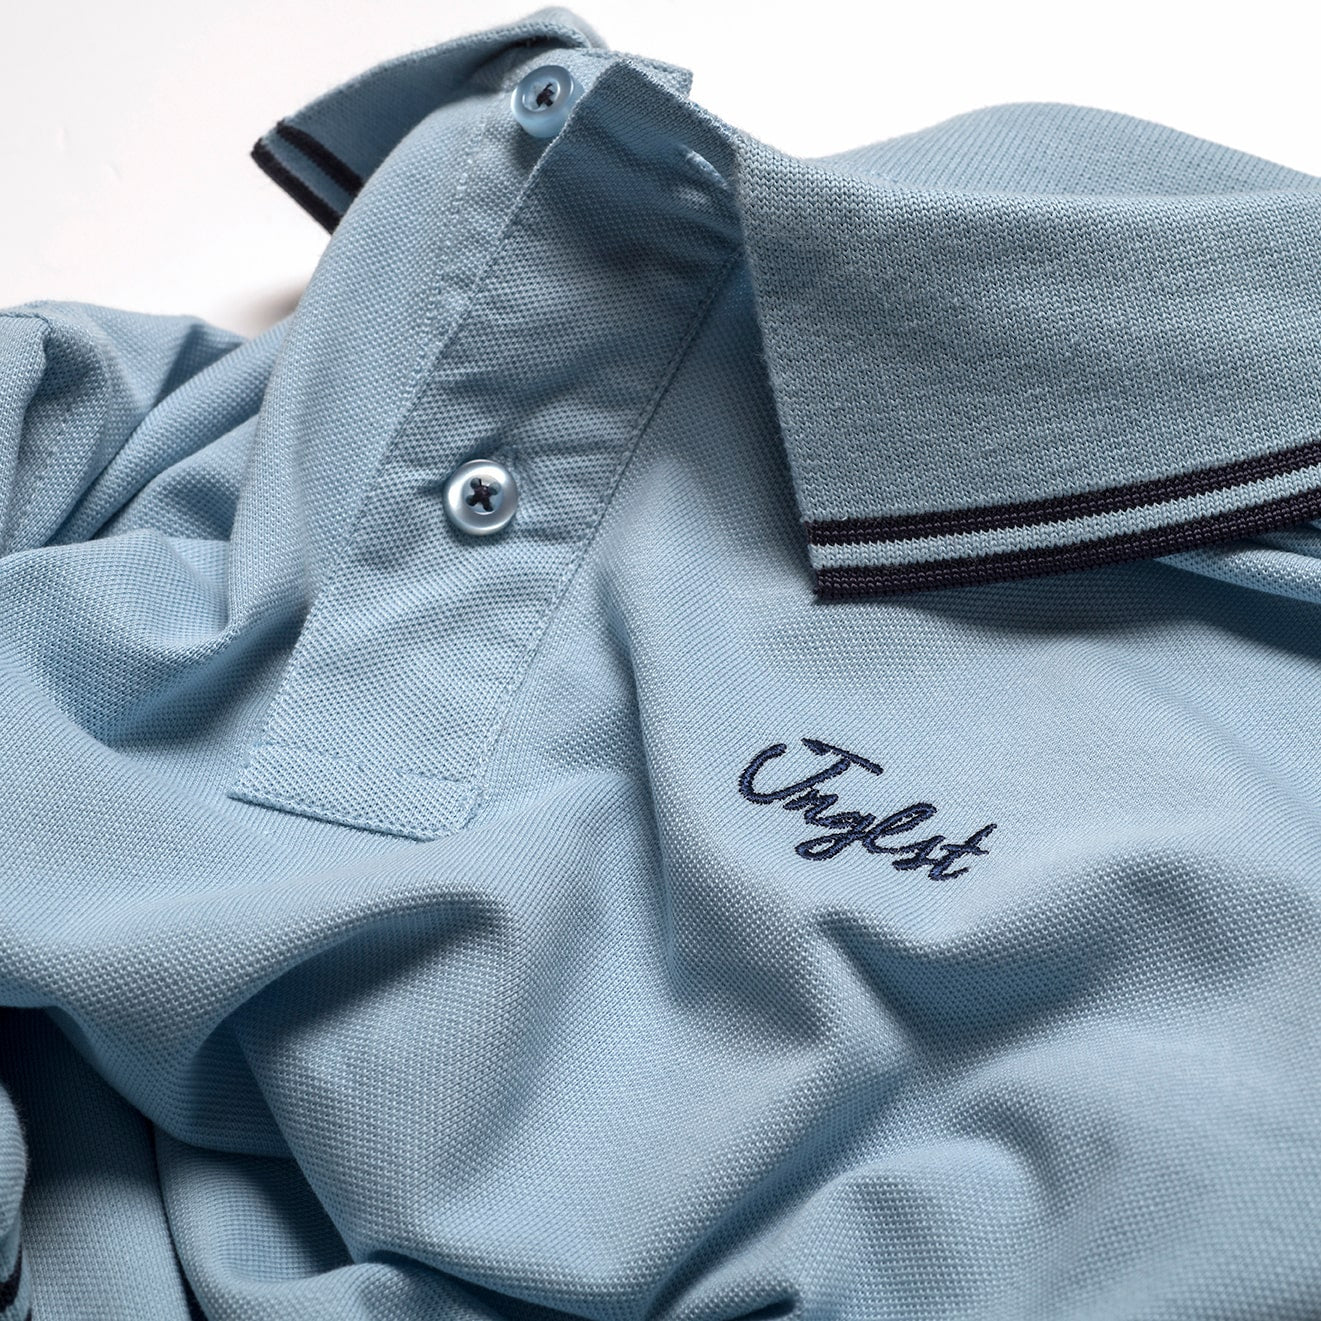 Close up of Jnglst Clothing logo on polo shirt